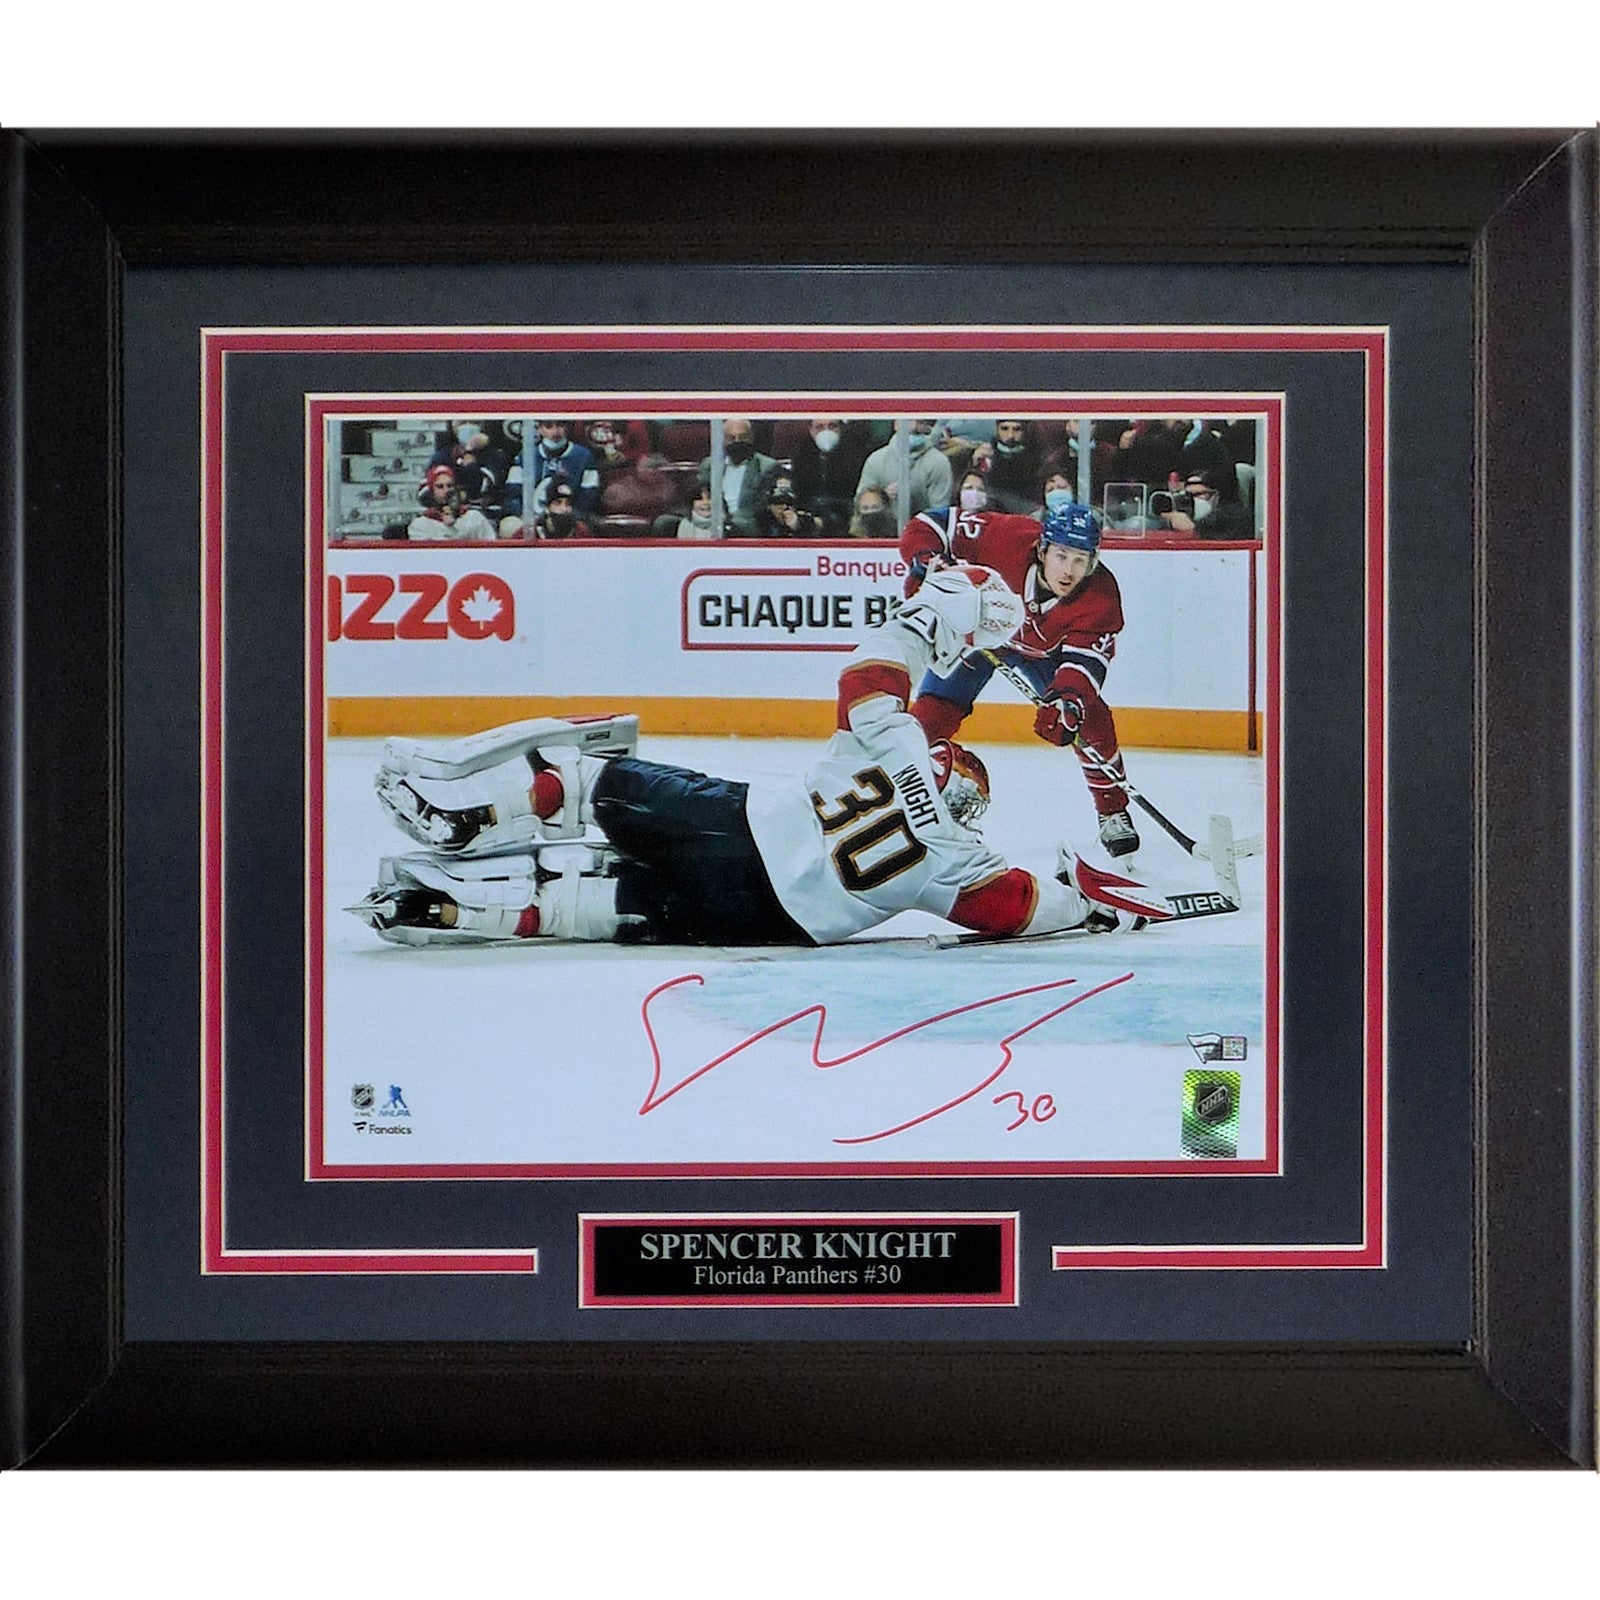 Spencer Knight Autographed Florida Panthers (Stick Save) Deluxe Framed 11x14 Photo - Fanatics